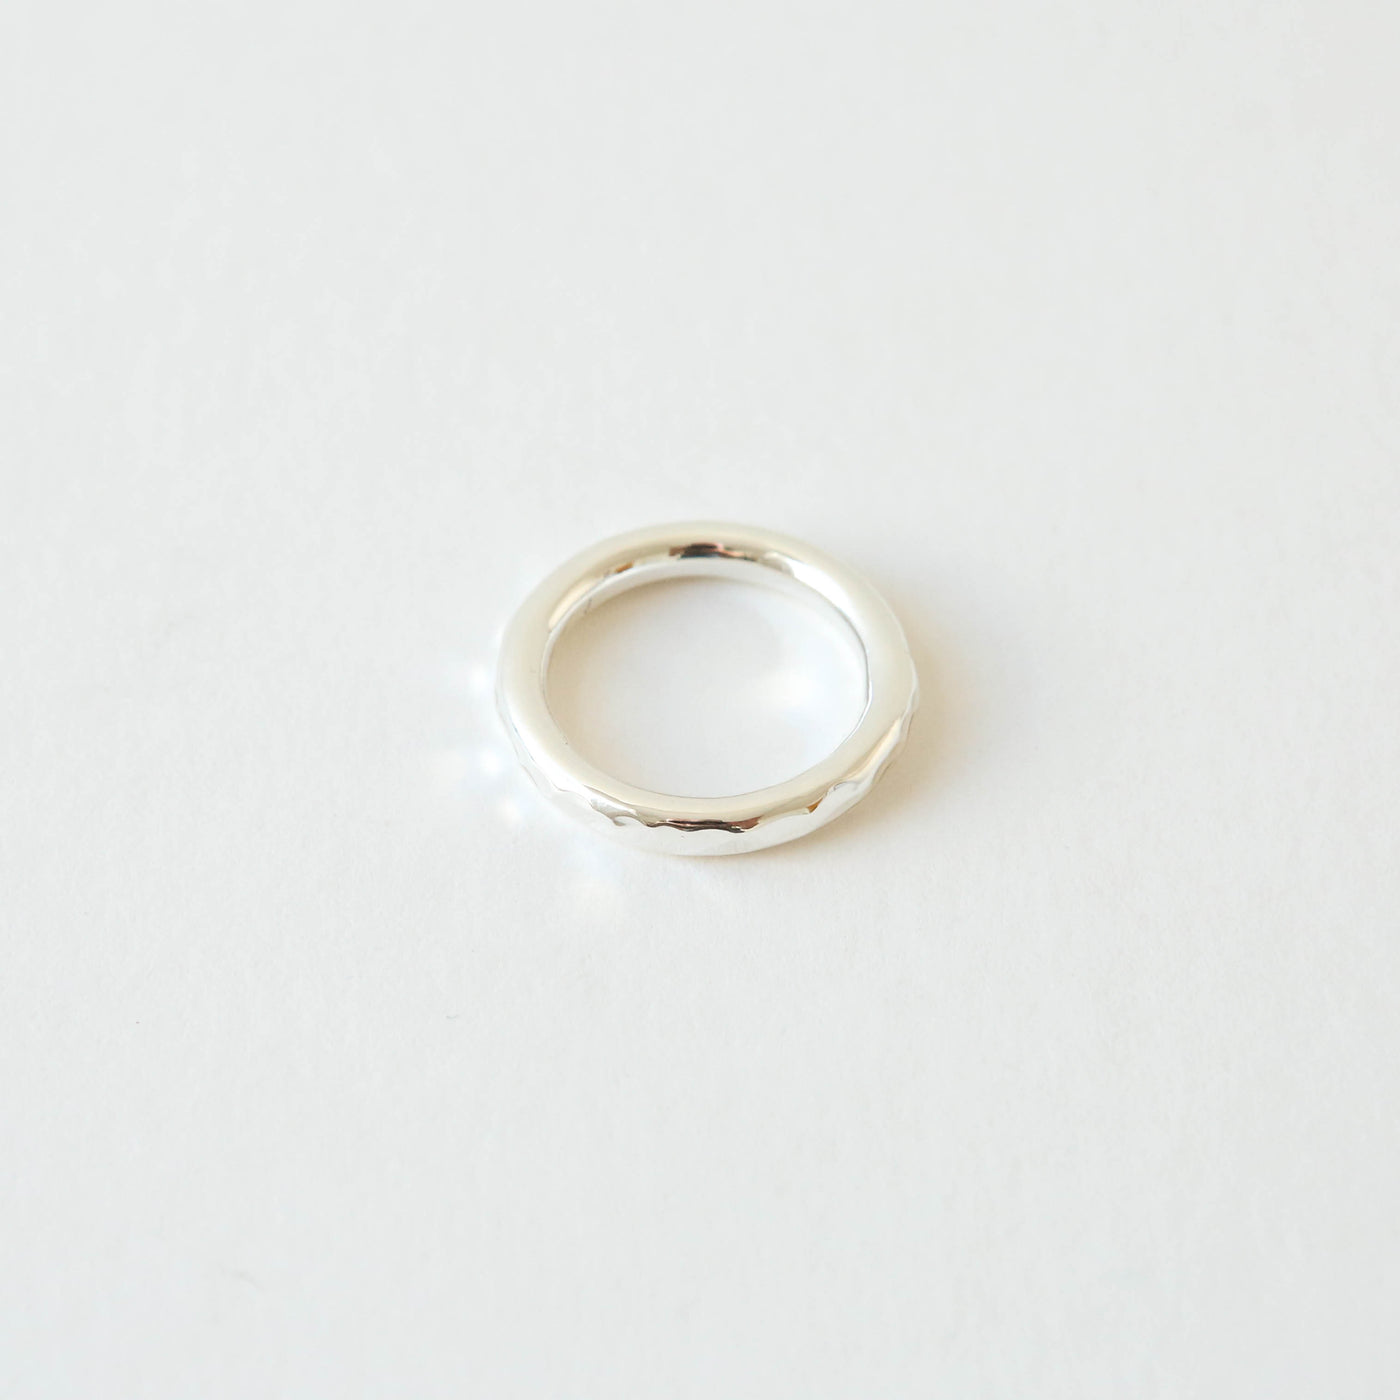 Olive Organic Ring - Silver Plated